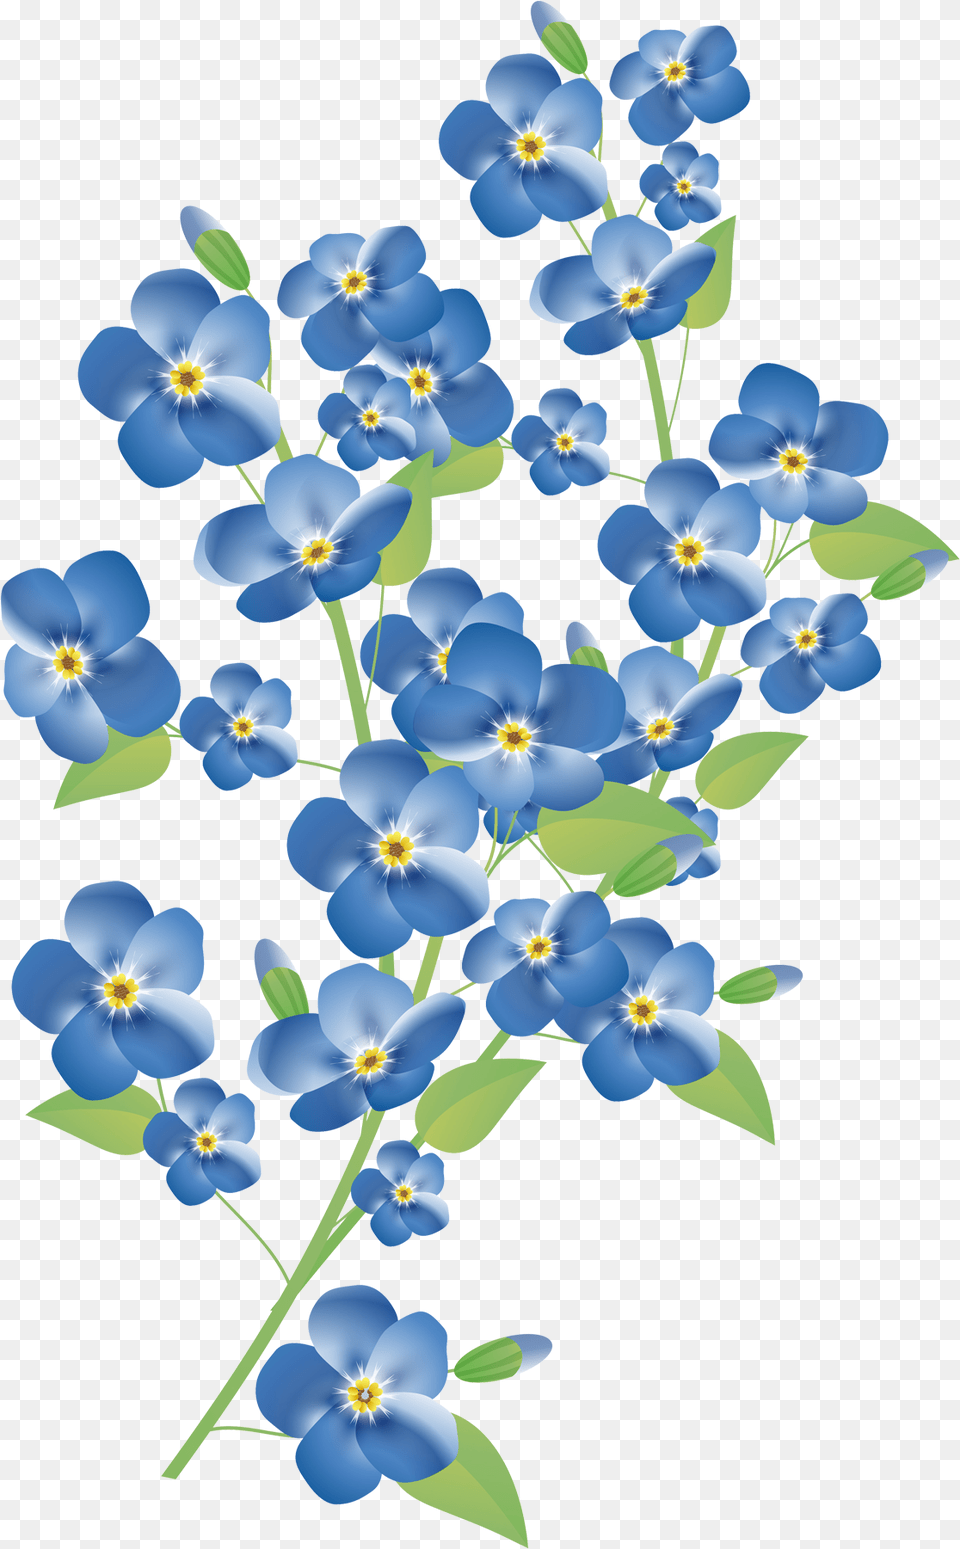 Forget Me Not Pic Forget Me Not Flower, Anemone, Plant, Petal, Geranium Png Image